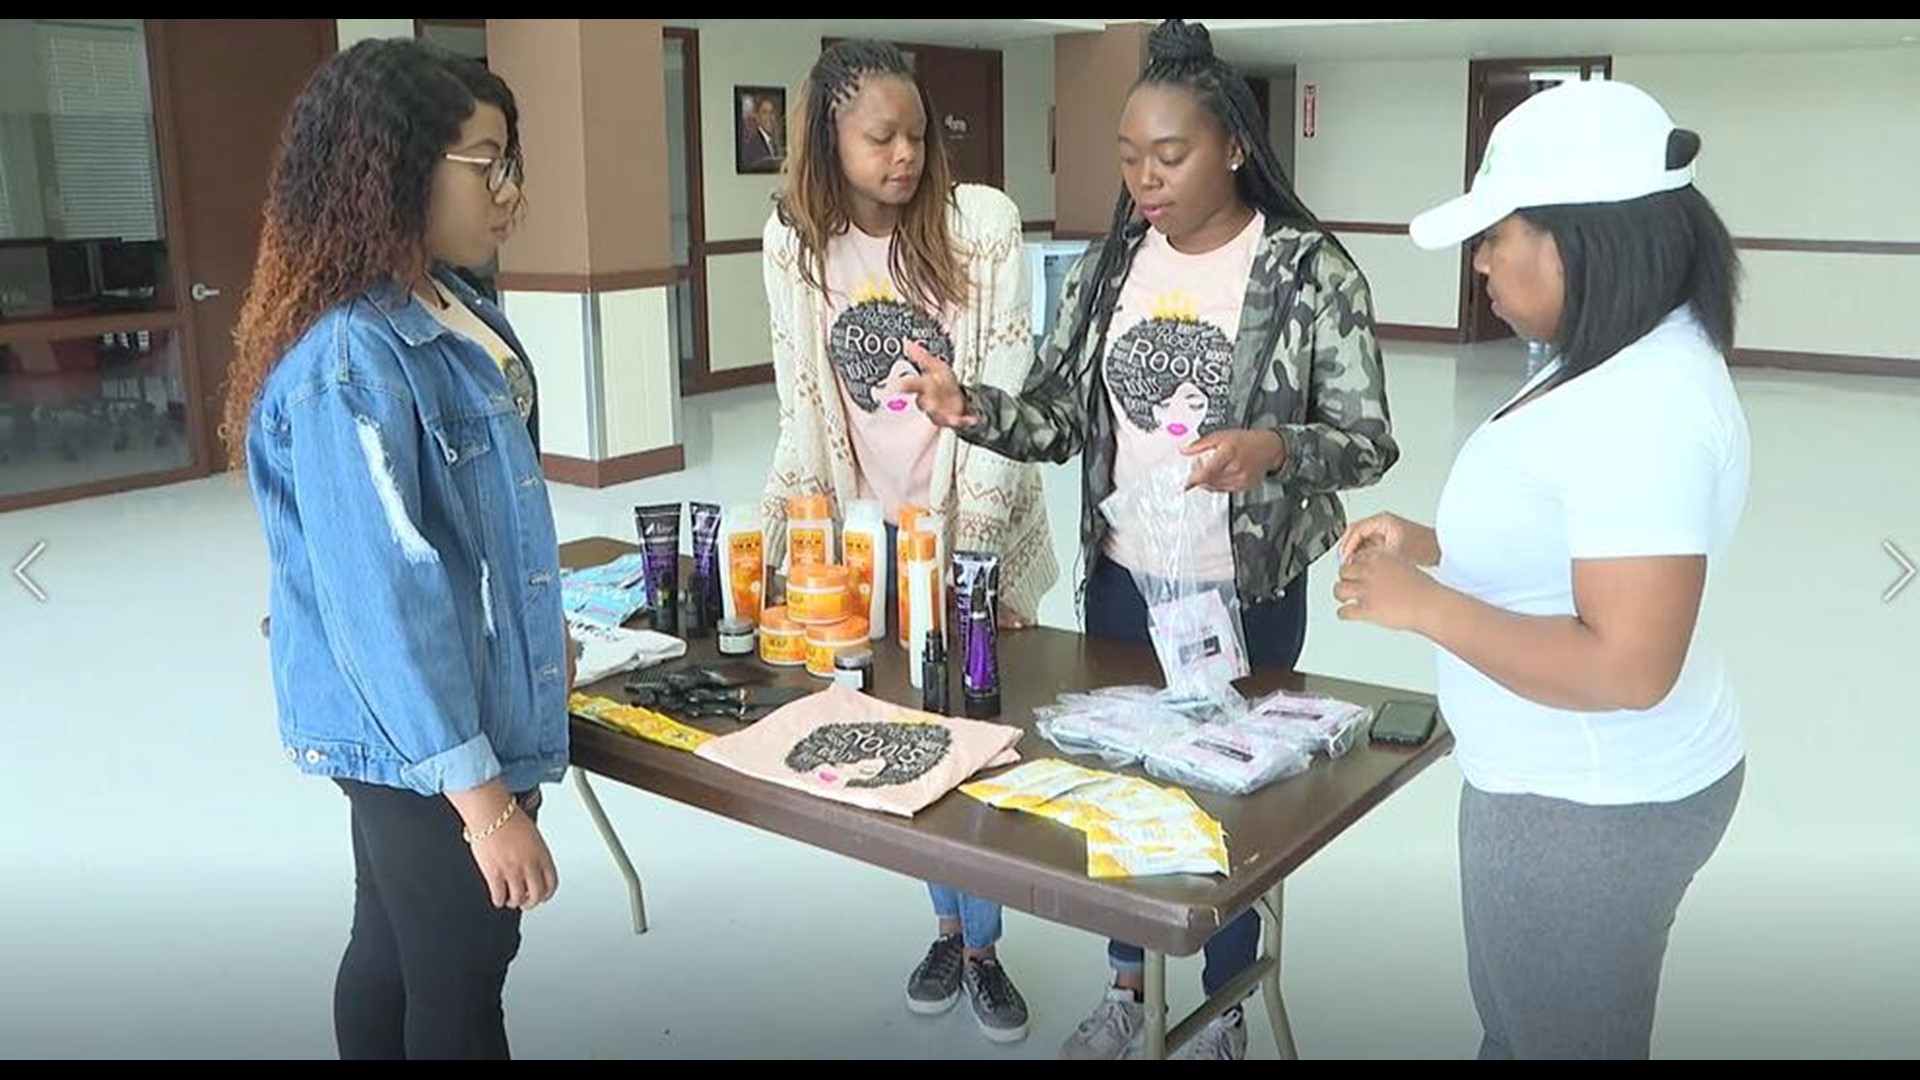 A new club at Baylor is encouraging people to embrace their natural beauty.